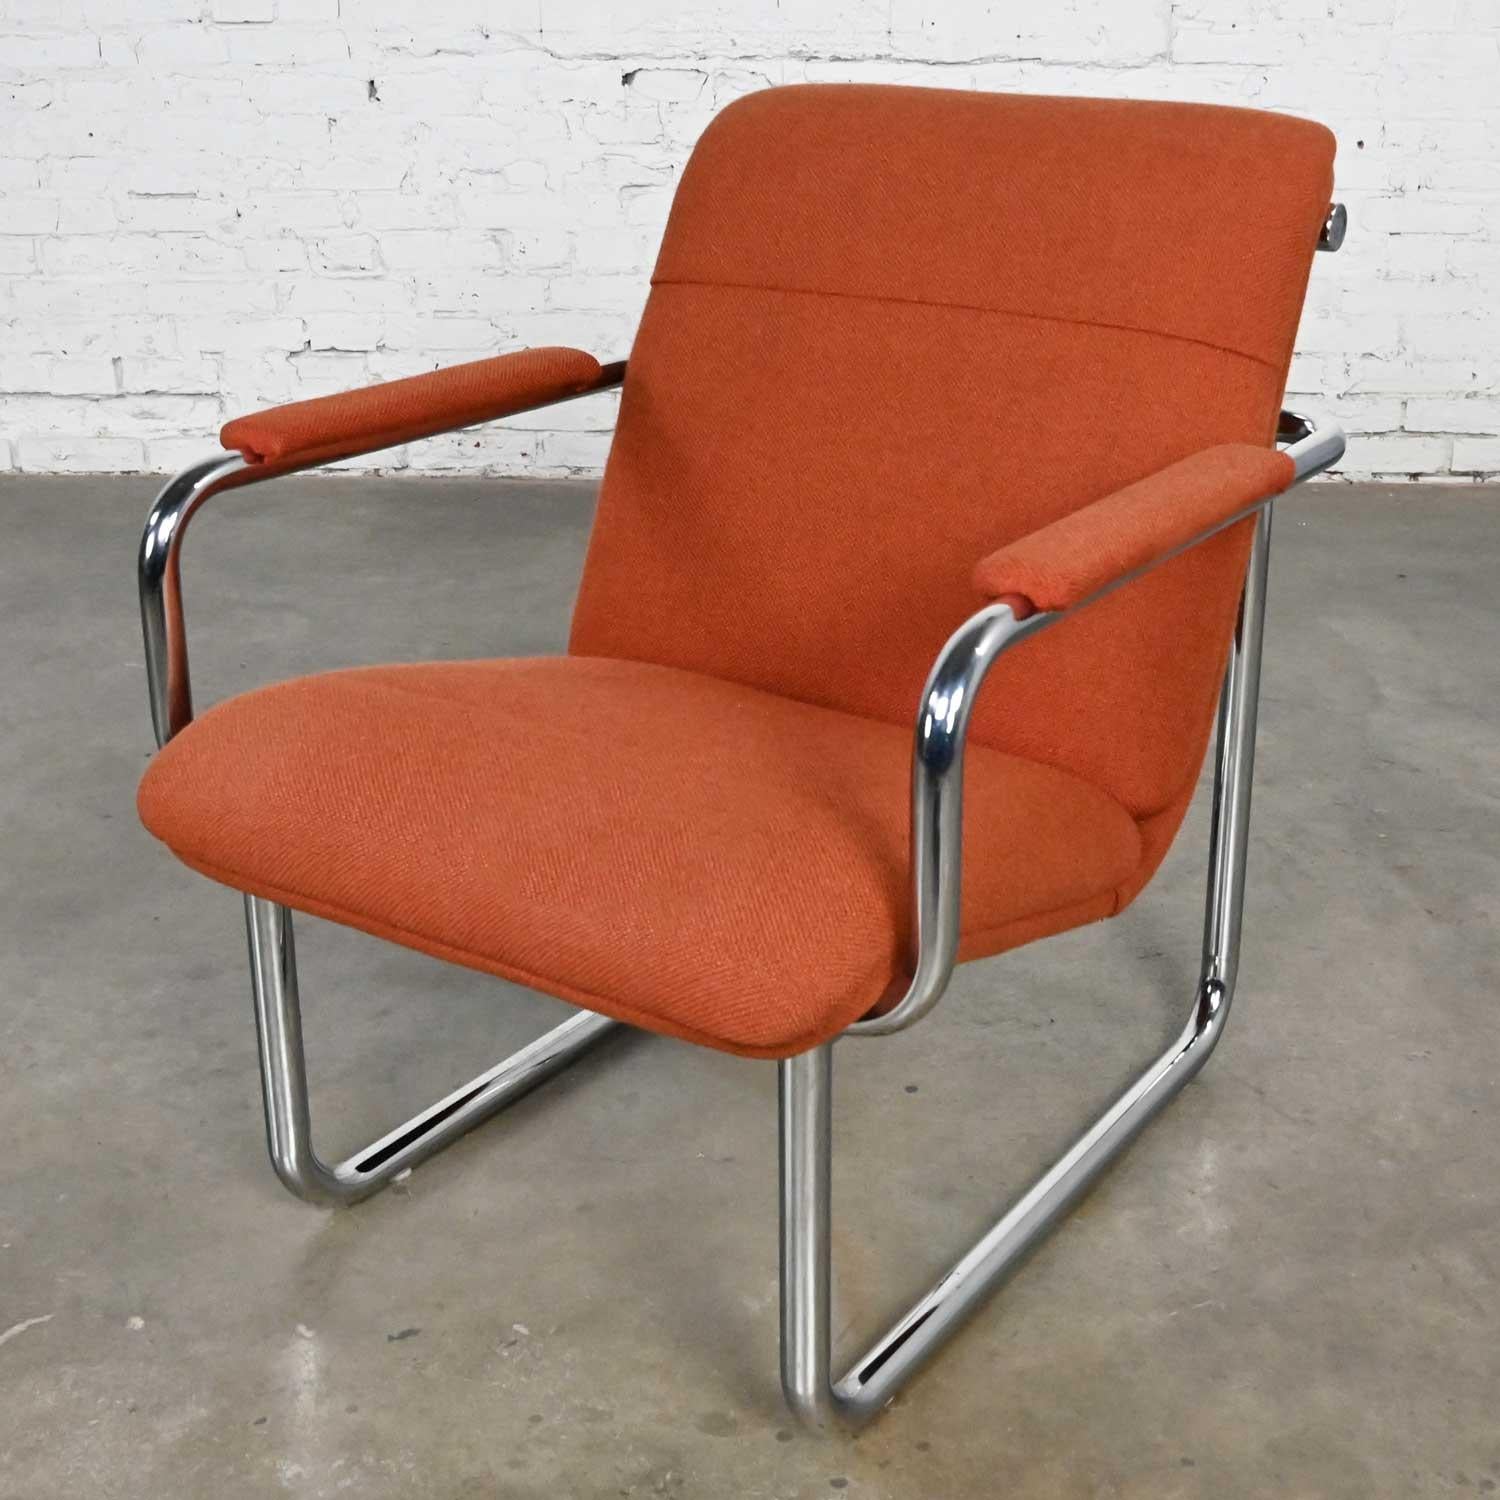 Handsome vintage All Steel Inc. modern armchair comprised of a chrome frame & original orange hopsacking fabric. Beautiful condition, keeping in mind that this is vintage and not new so will have signs of use and wear. It has been professionally